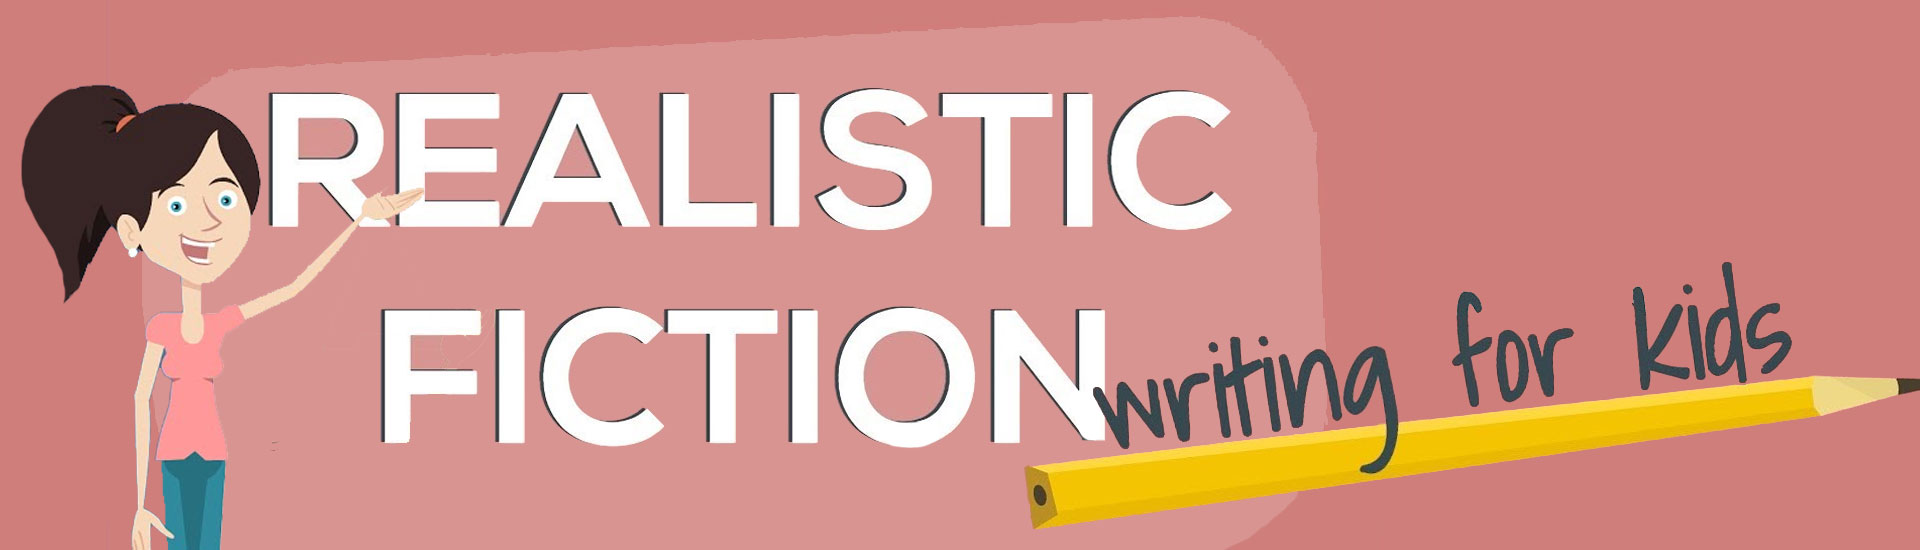 Realistic Fiction Writing for Kids